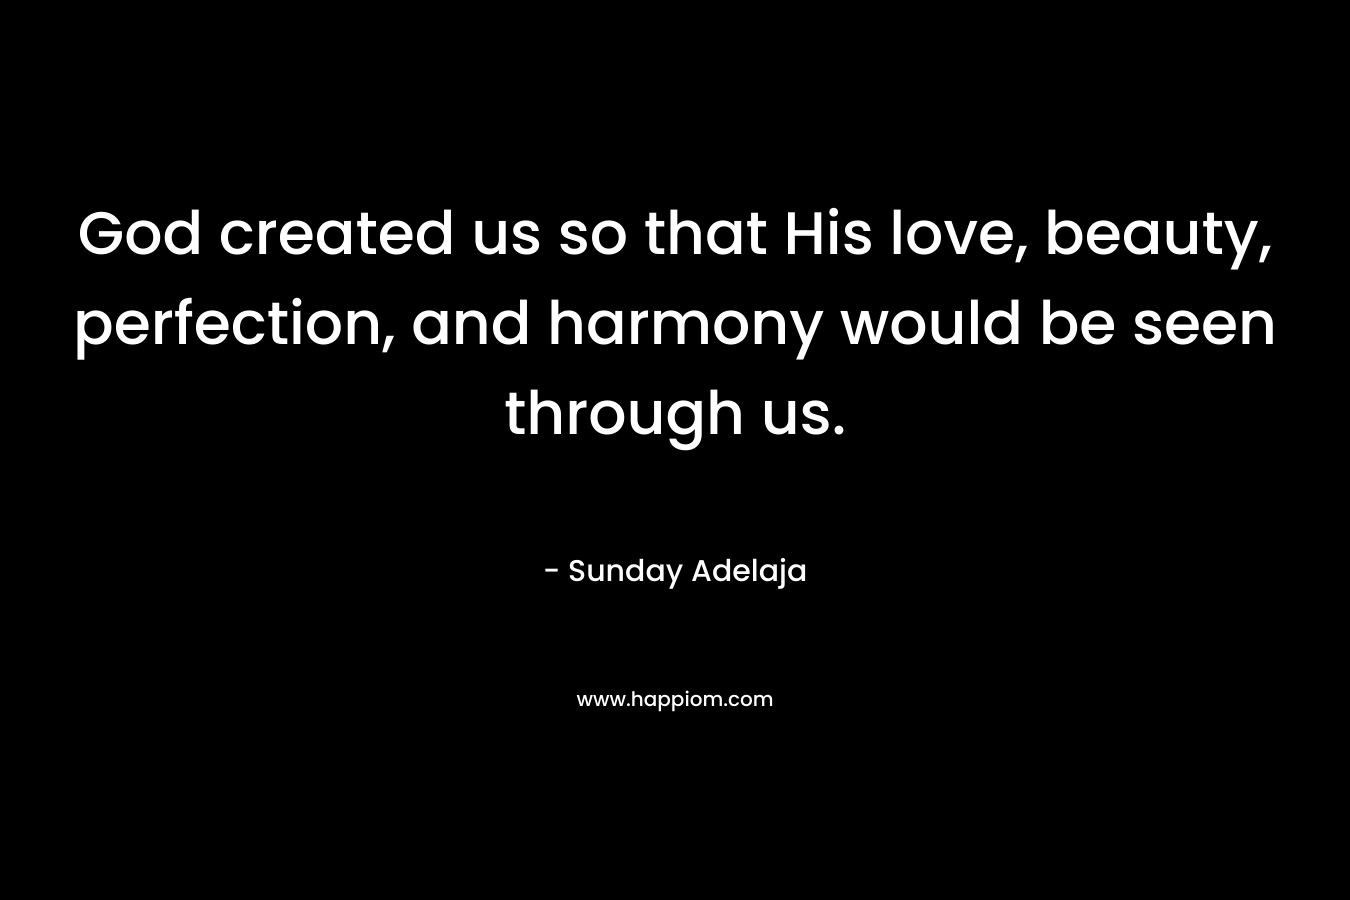 God created us so that His love, beauty, perfection, and harmony would be seen through us. – Sunday Adelaja